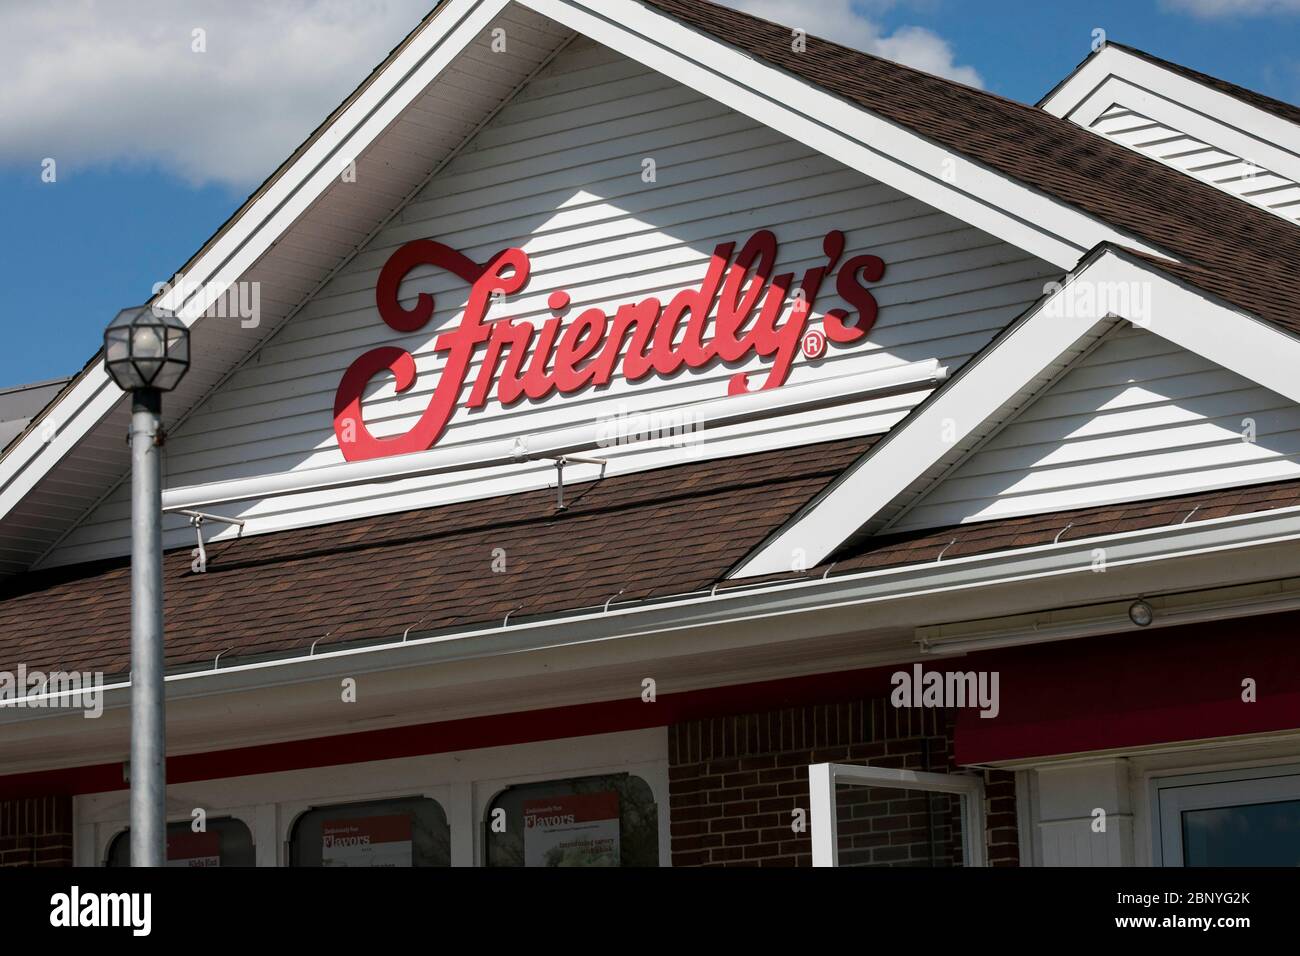 A logo sign outside of a Friendly's restaurant location in Hershey, Pennsylvania on May 4, 2020. Stock Photo